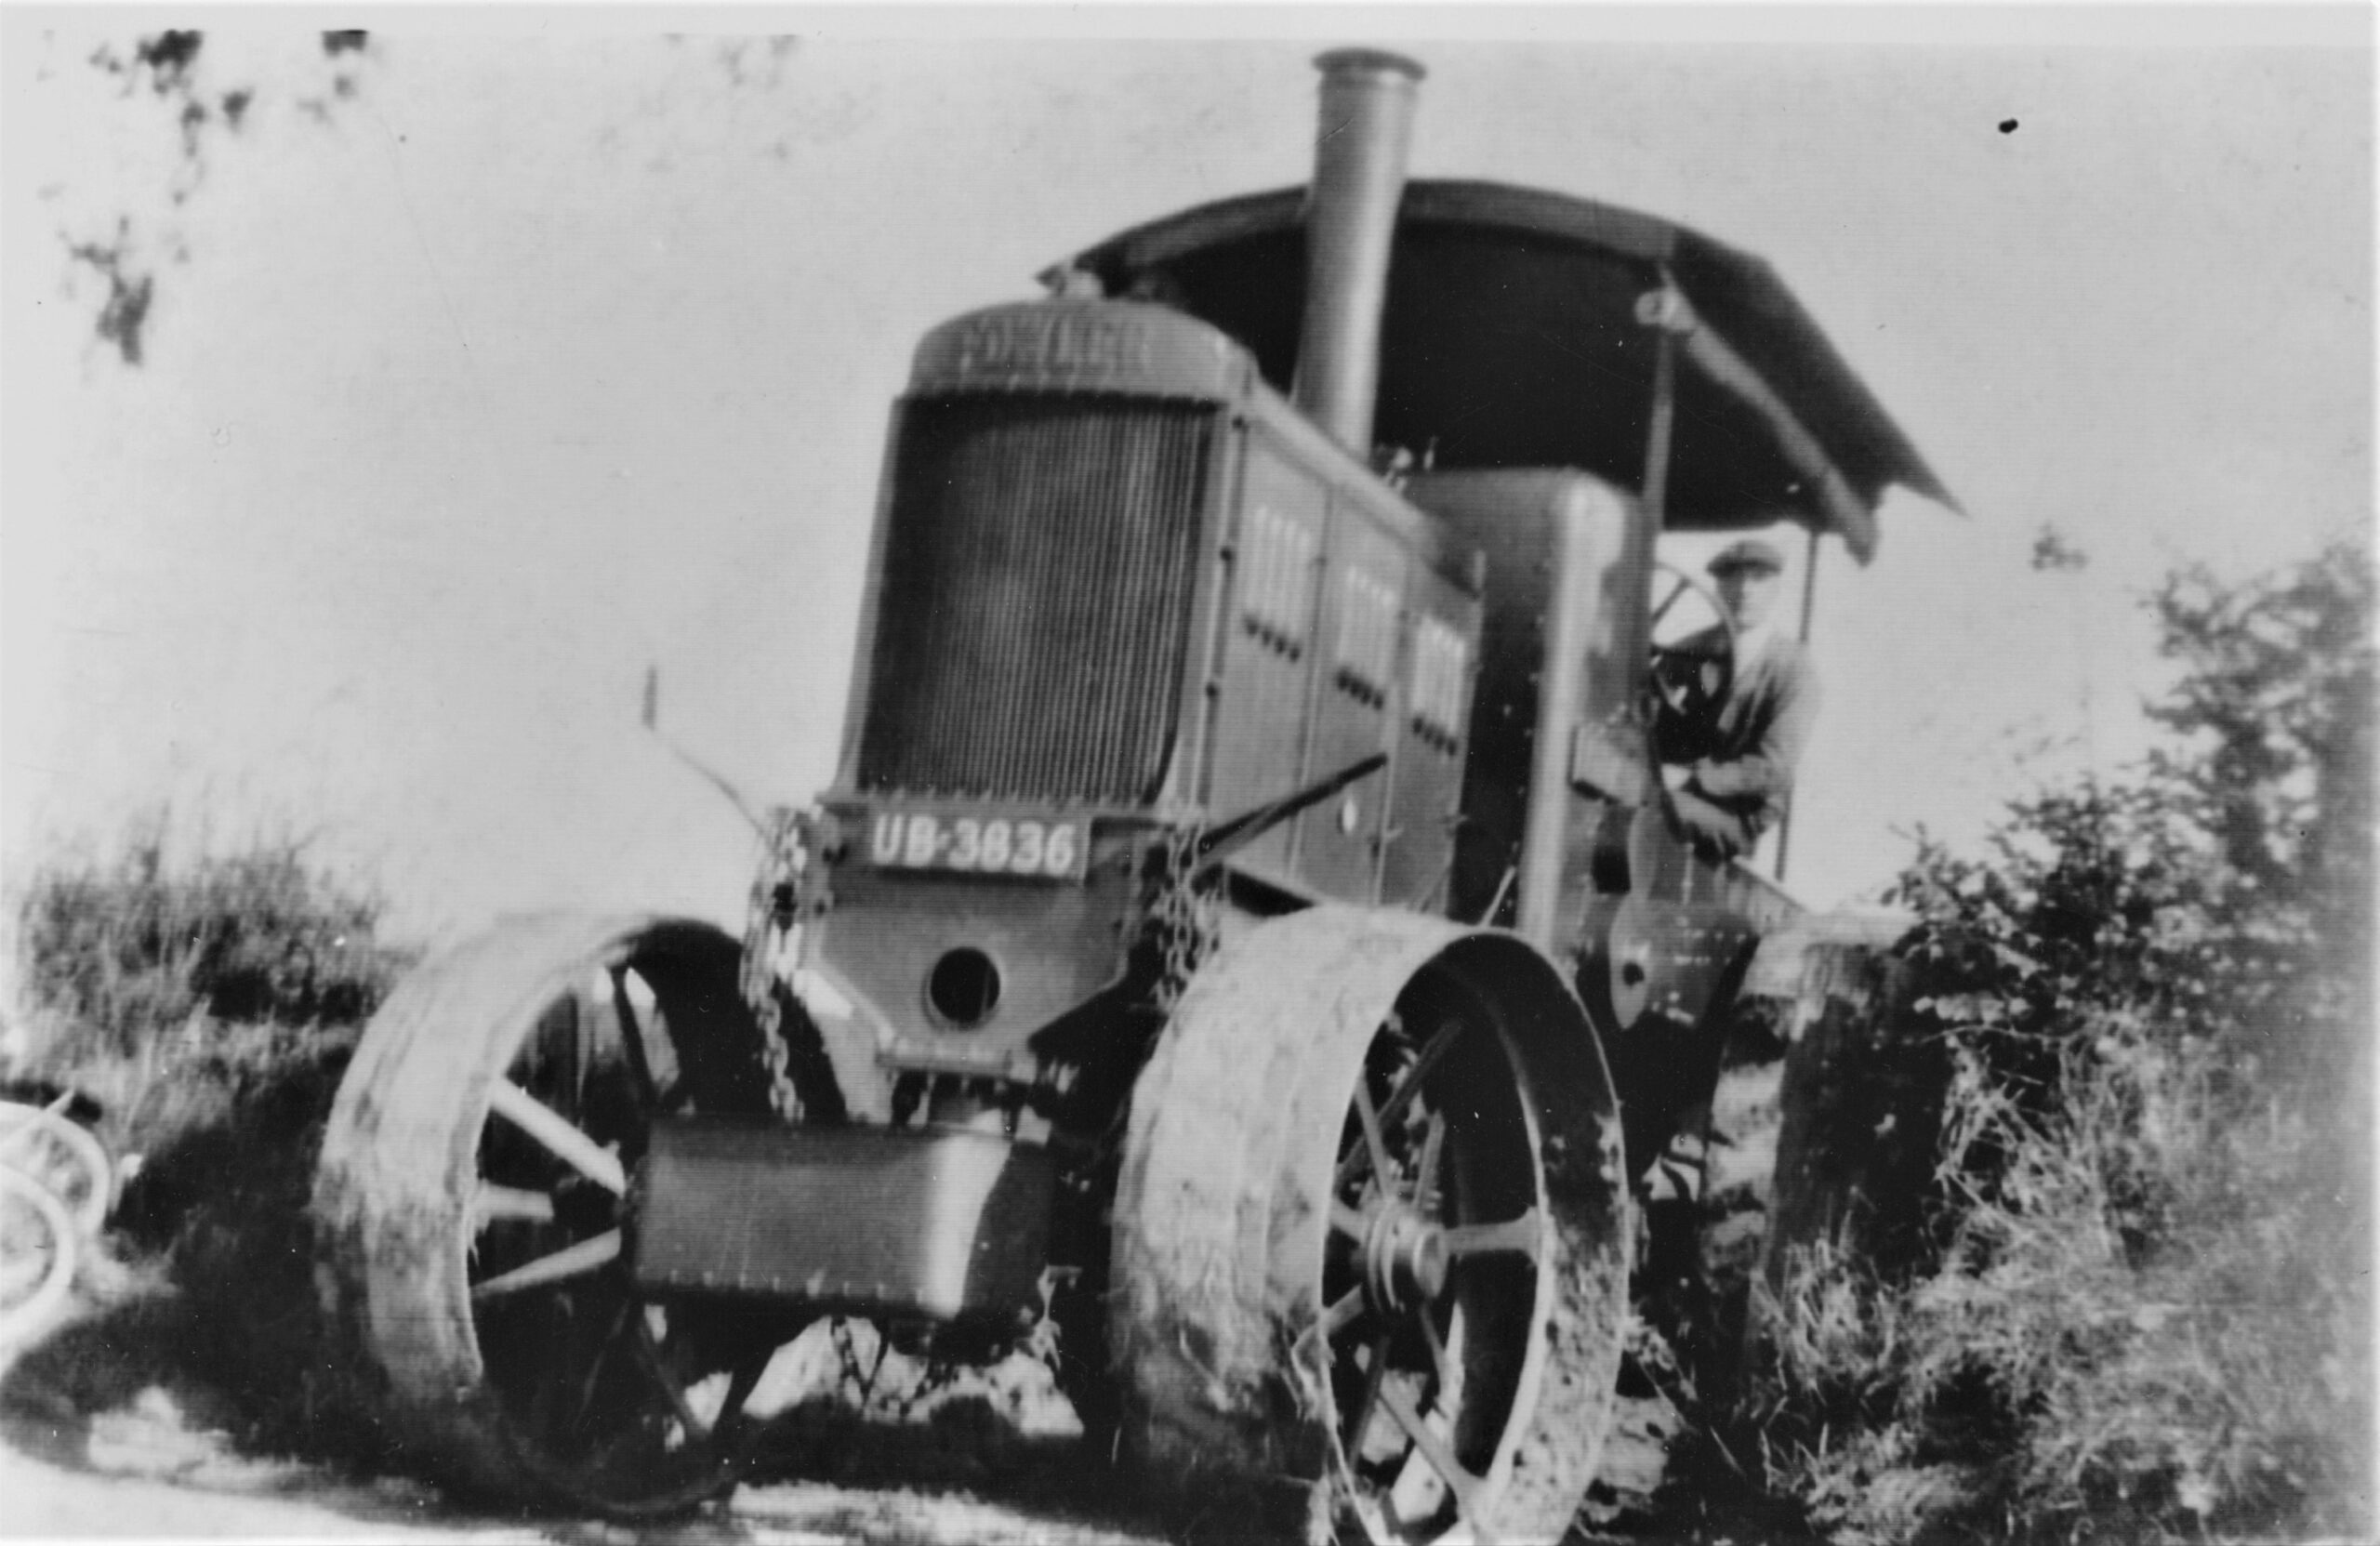 Fowler Motor Cable Ploughing engine registration UB 3836. Originally turned out with Browett-Lindley petrol engine in 1926. Later, in 1933, converted to 80hp 6-cylinder diesel engine. Photo is pre-1933.